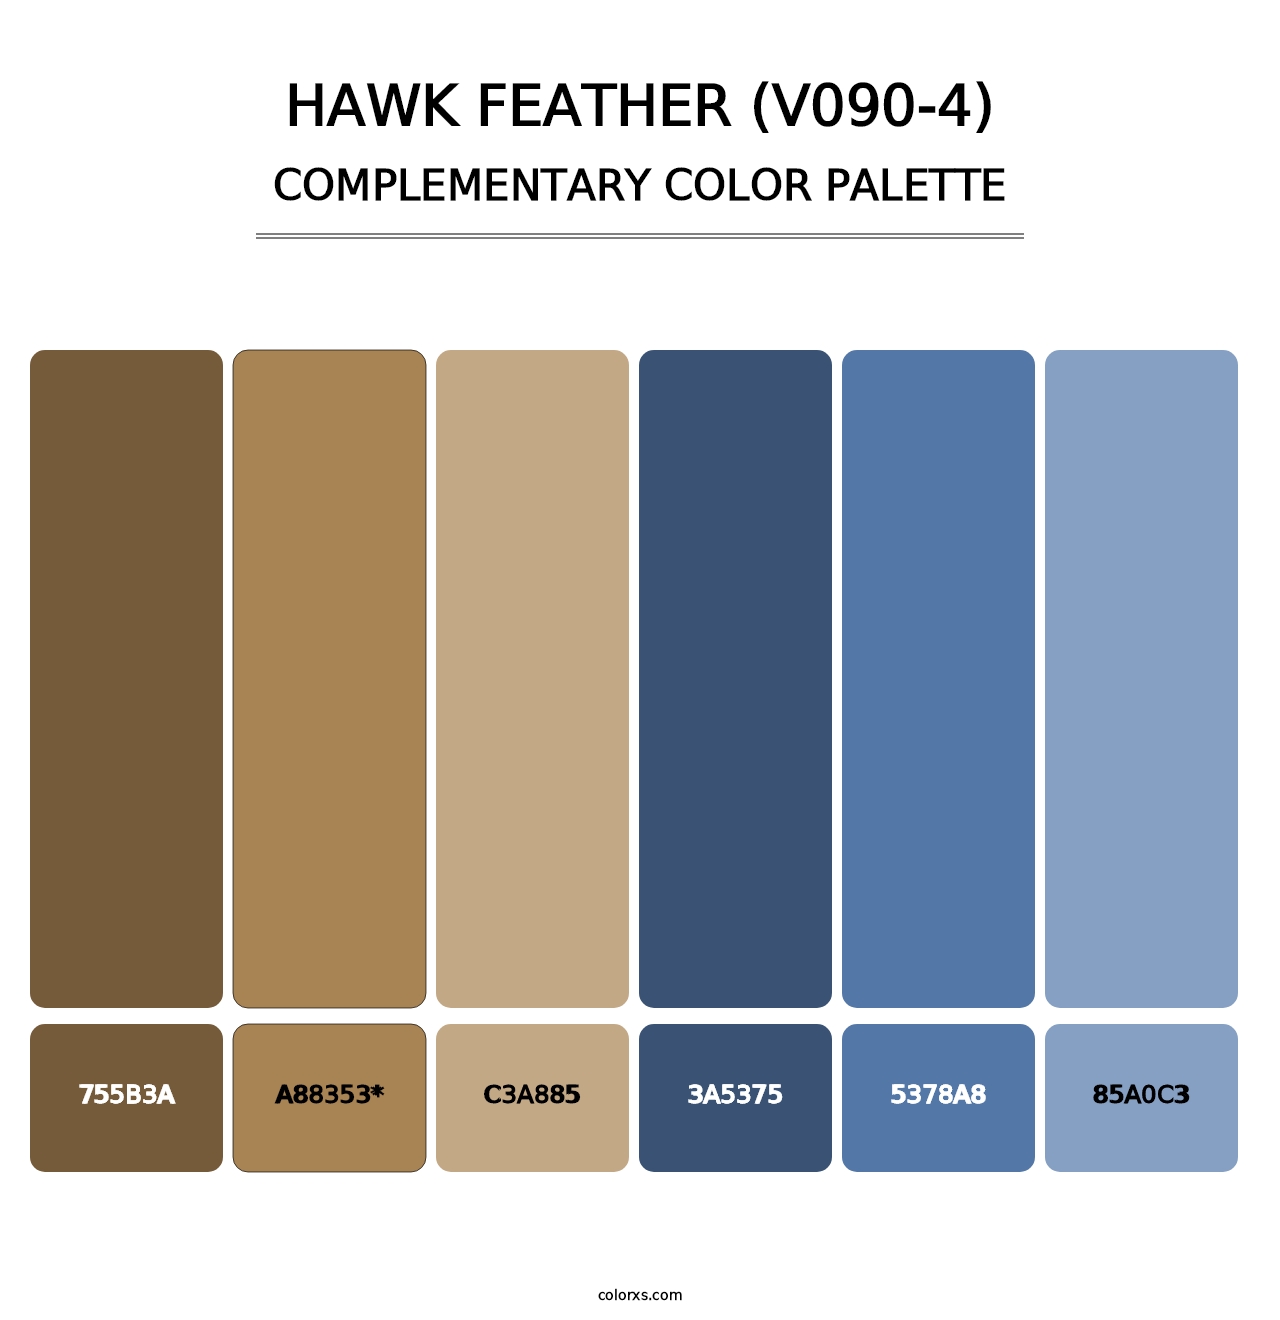 Hawk Feather (V090-4) - Complementary Color Palette